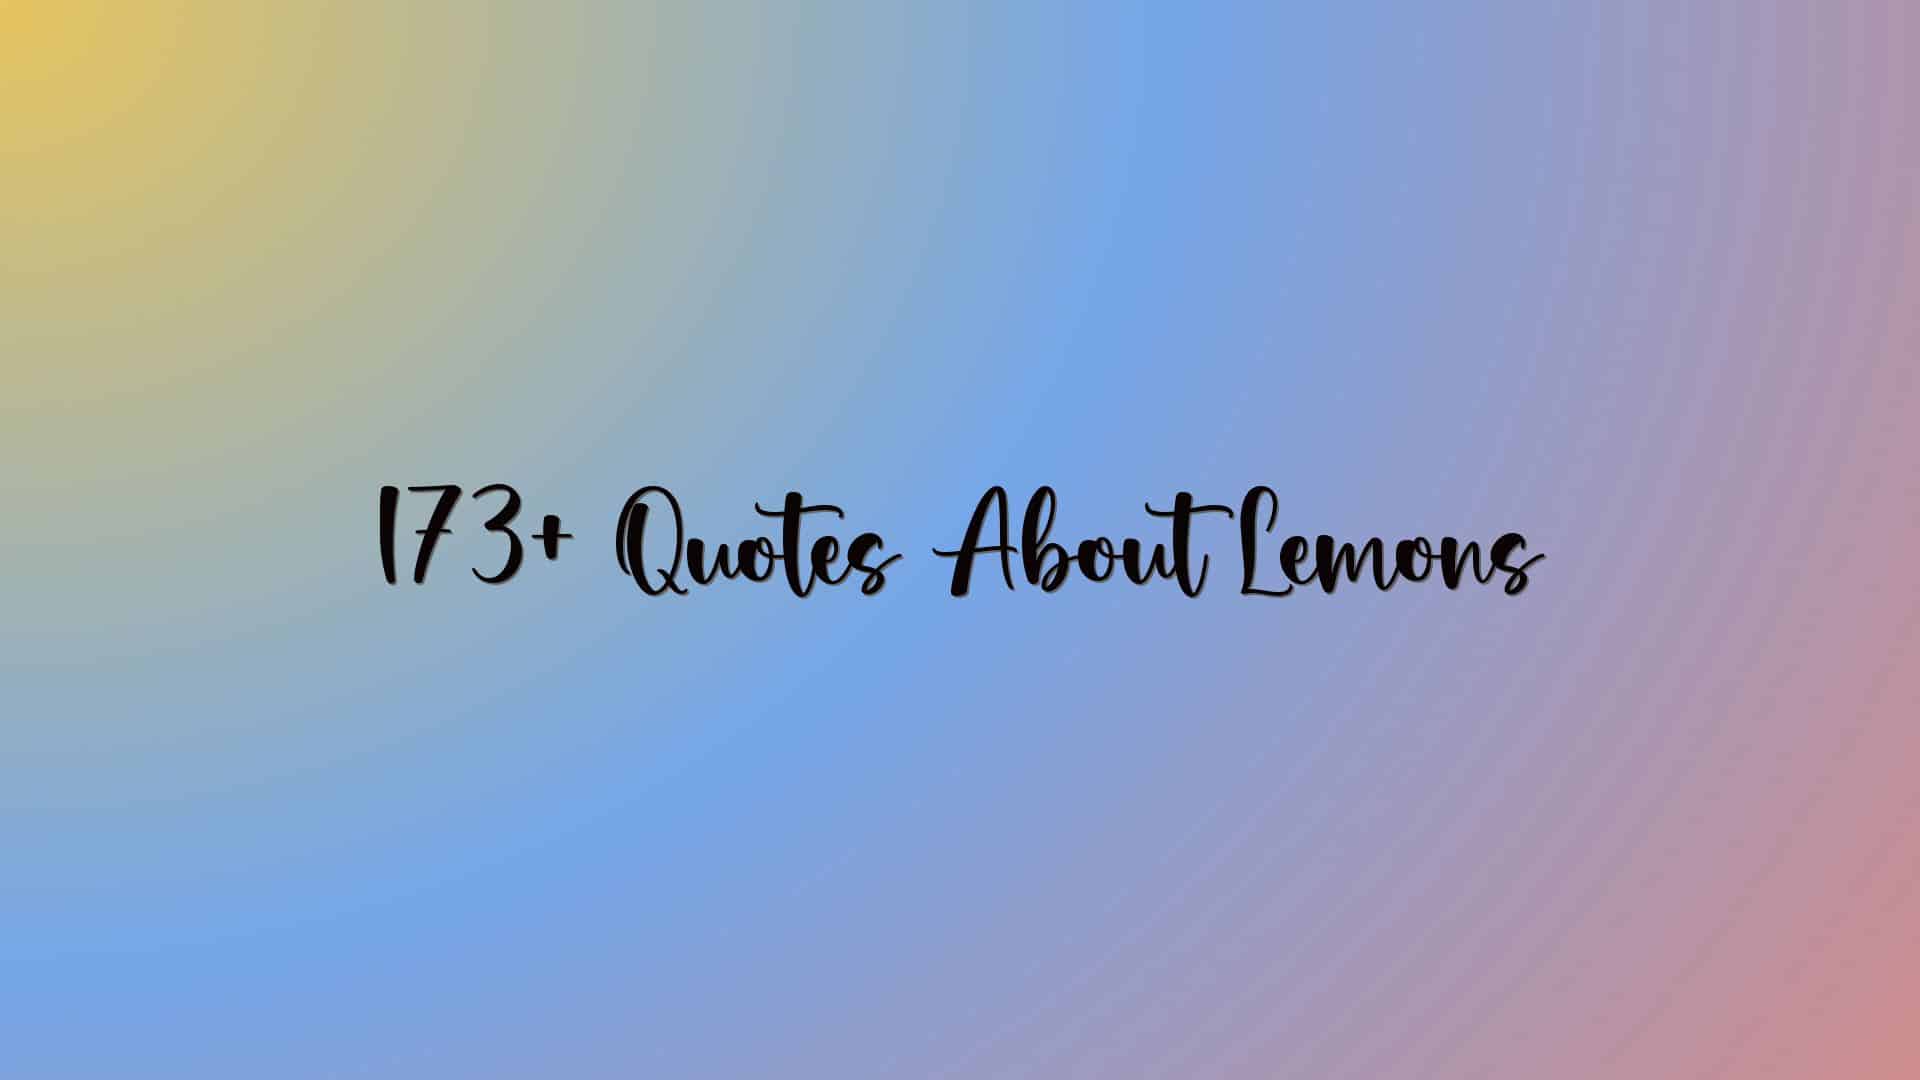 173+ Quotes About Lemons